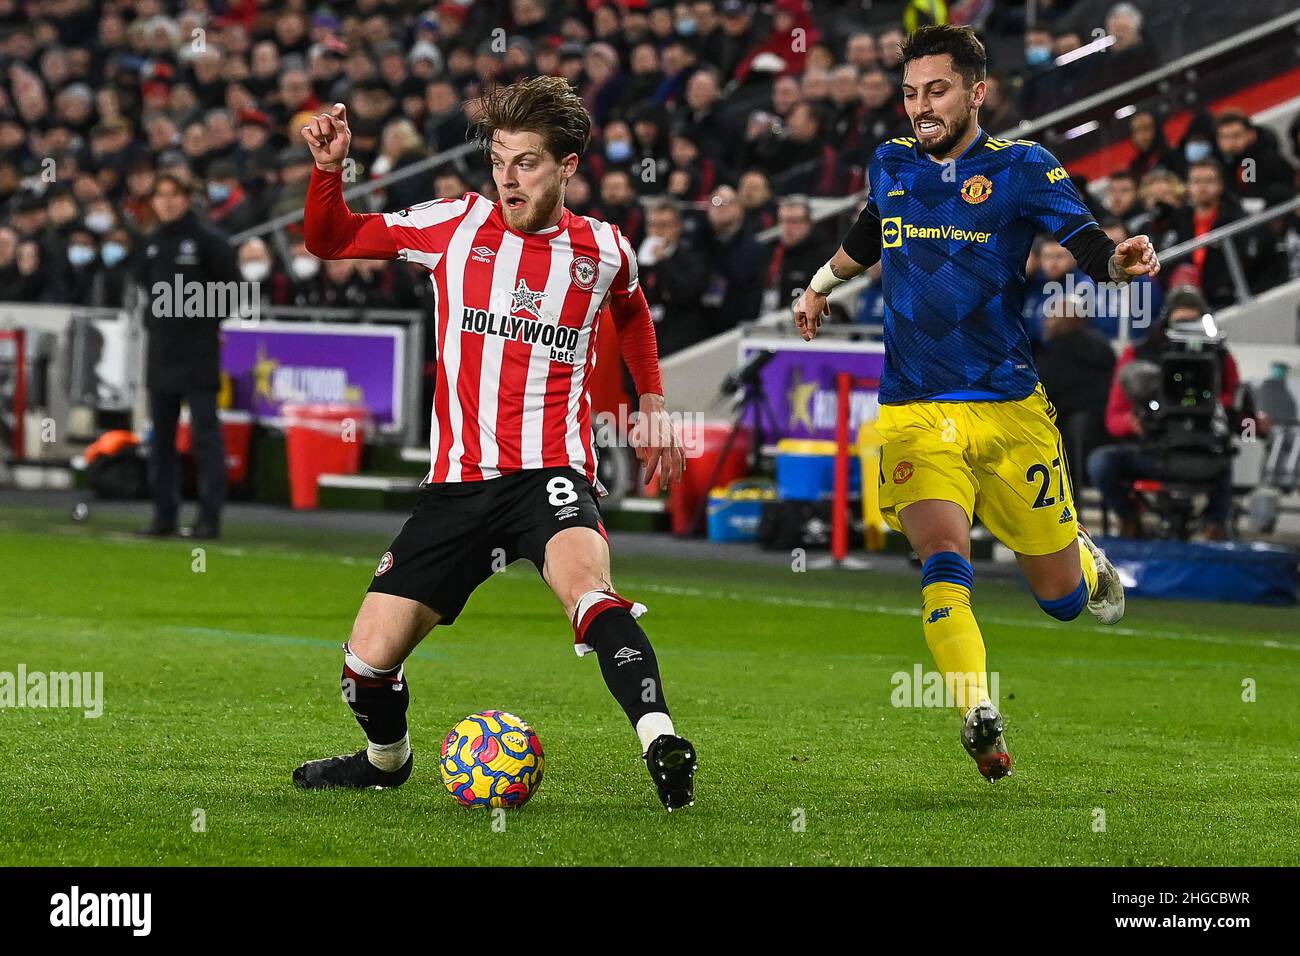 Mathias Jensen #8 of Brentford in action during the game in, on 1/19/2022. (Photo by Craig Thomas/News Images/Sipa USA) Credit: Sipa USA/Alamy Live News Stock Photo